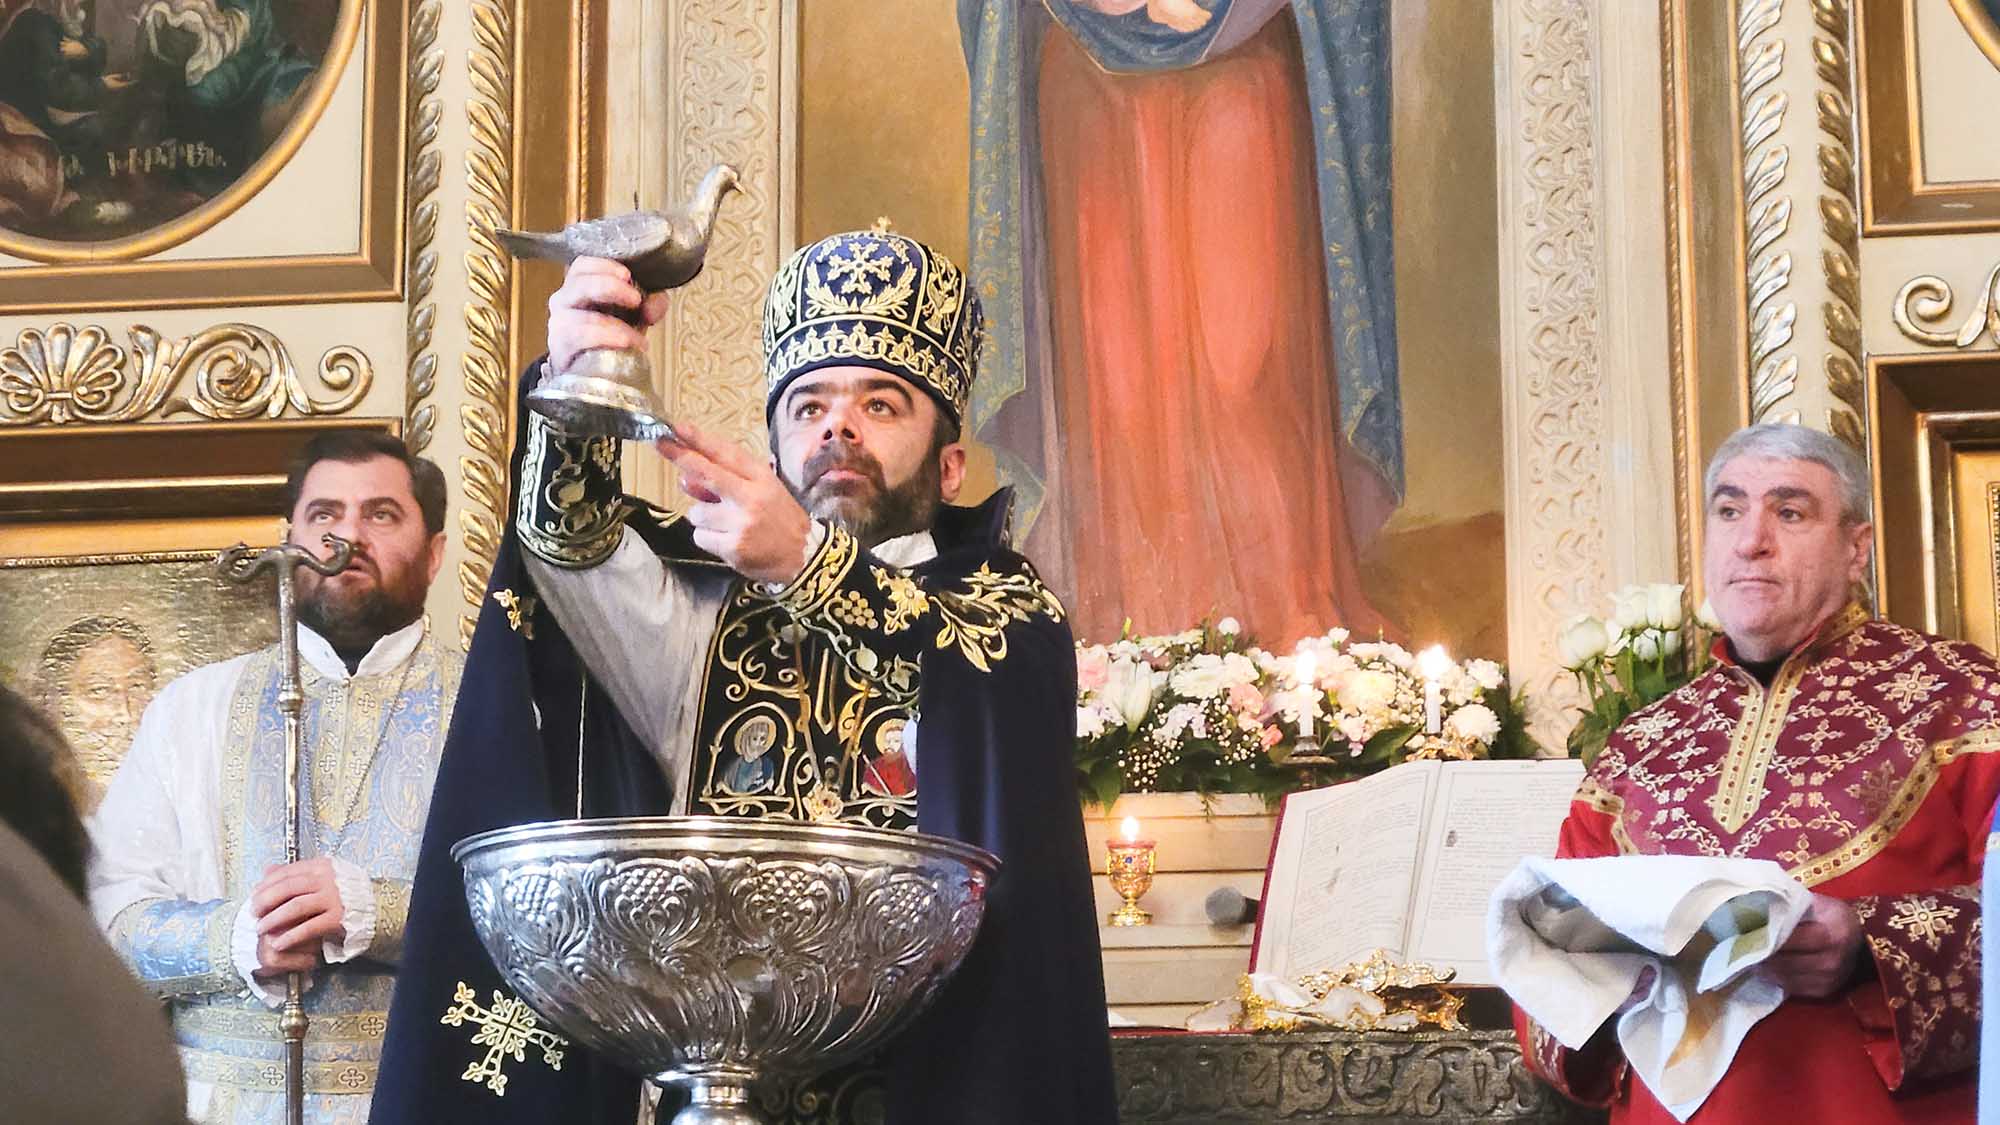 Good News of the Holy Nativity of Jesus Christ spread at churches of the Armenian Diocese in Georgia